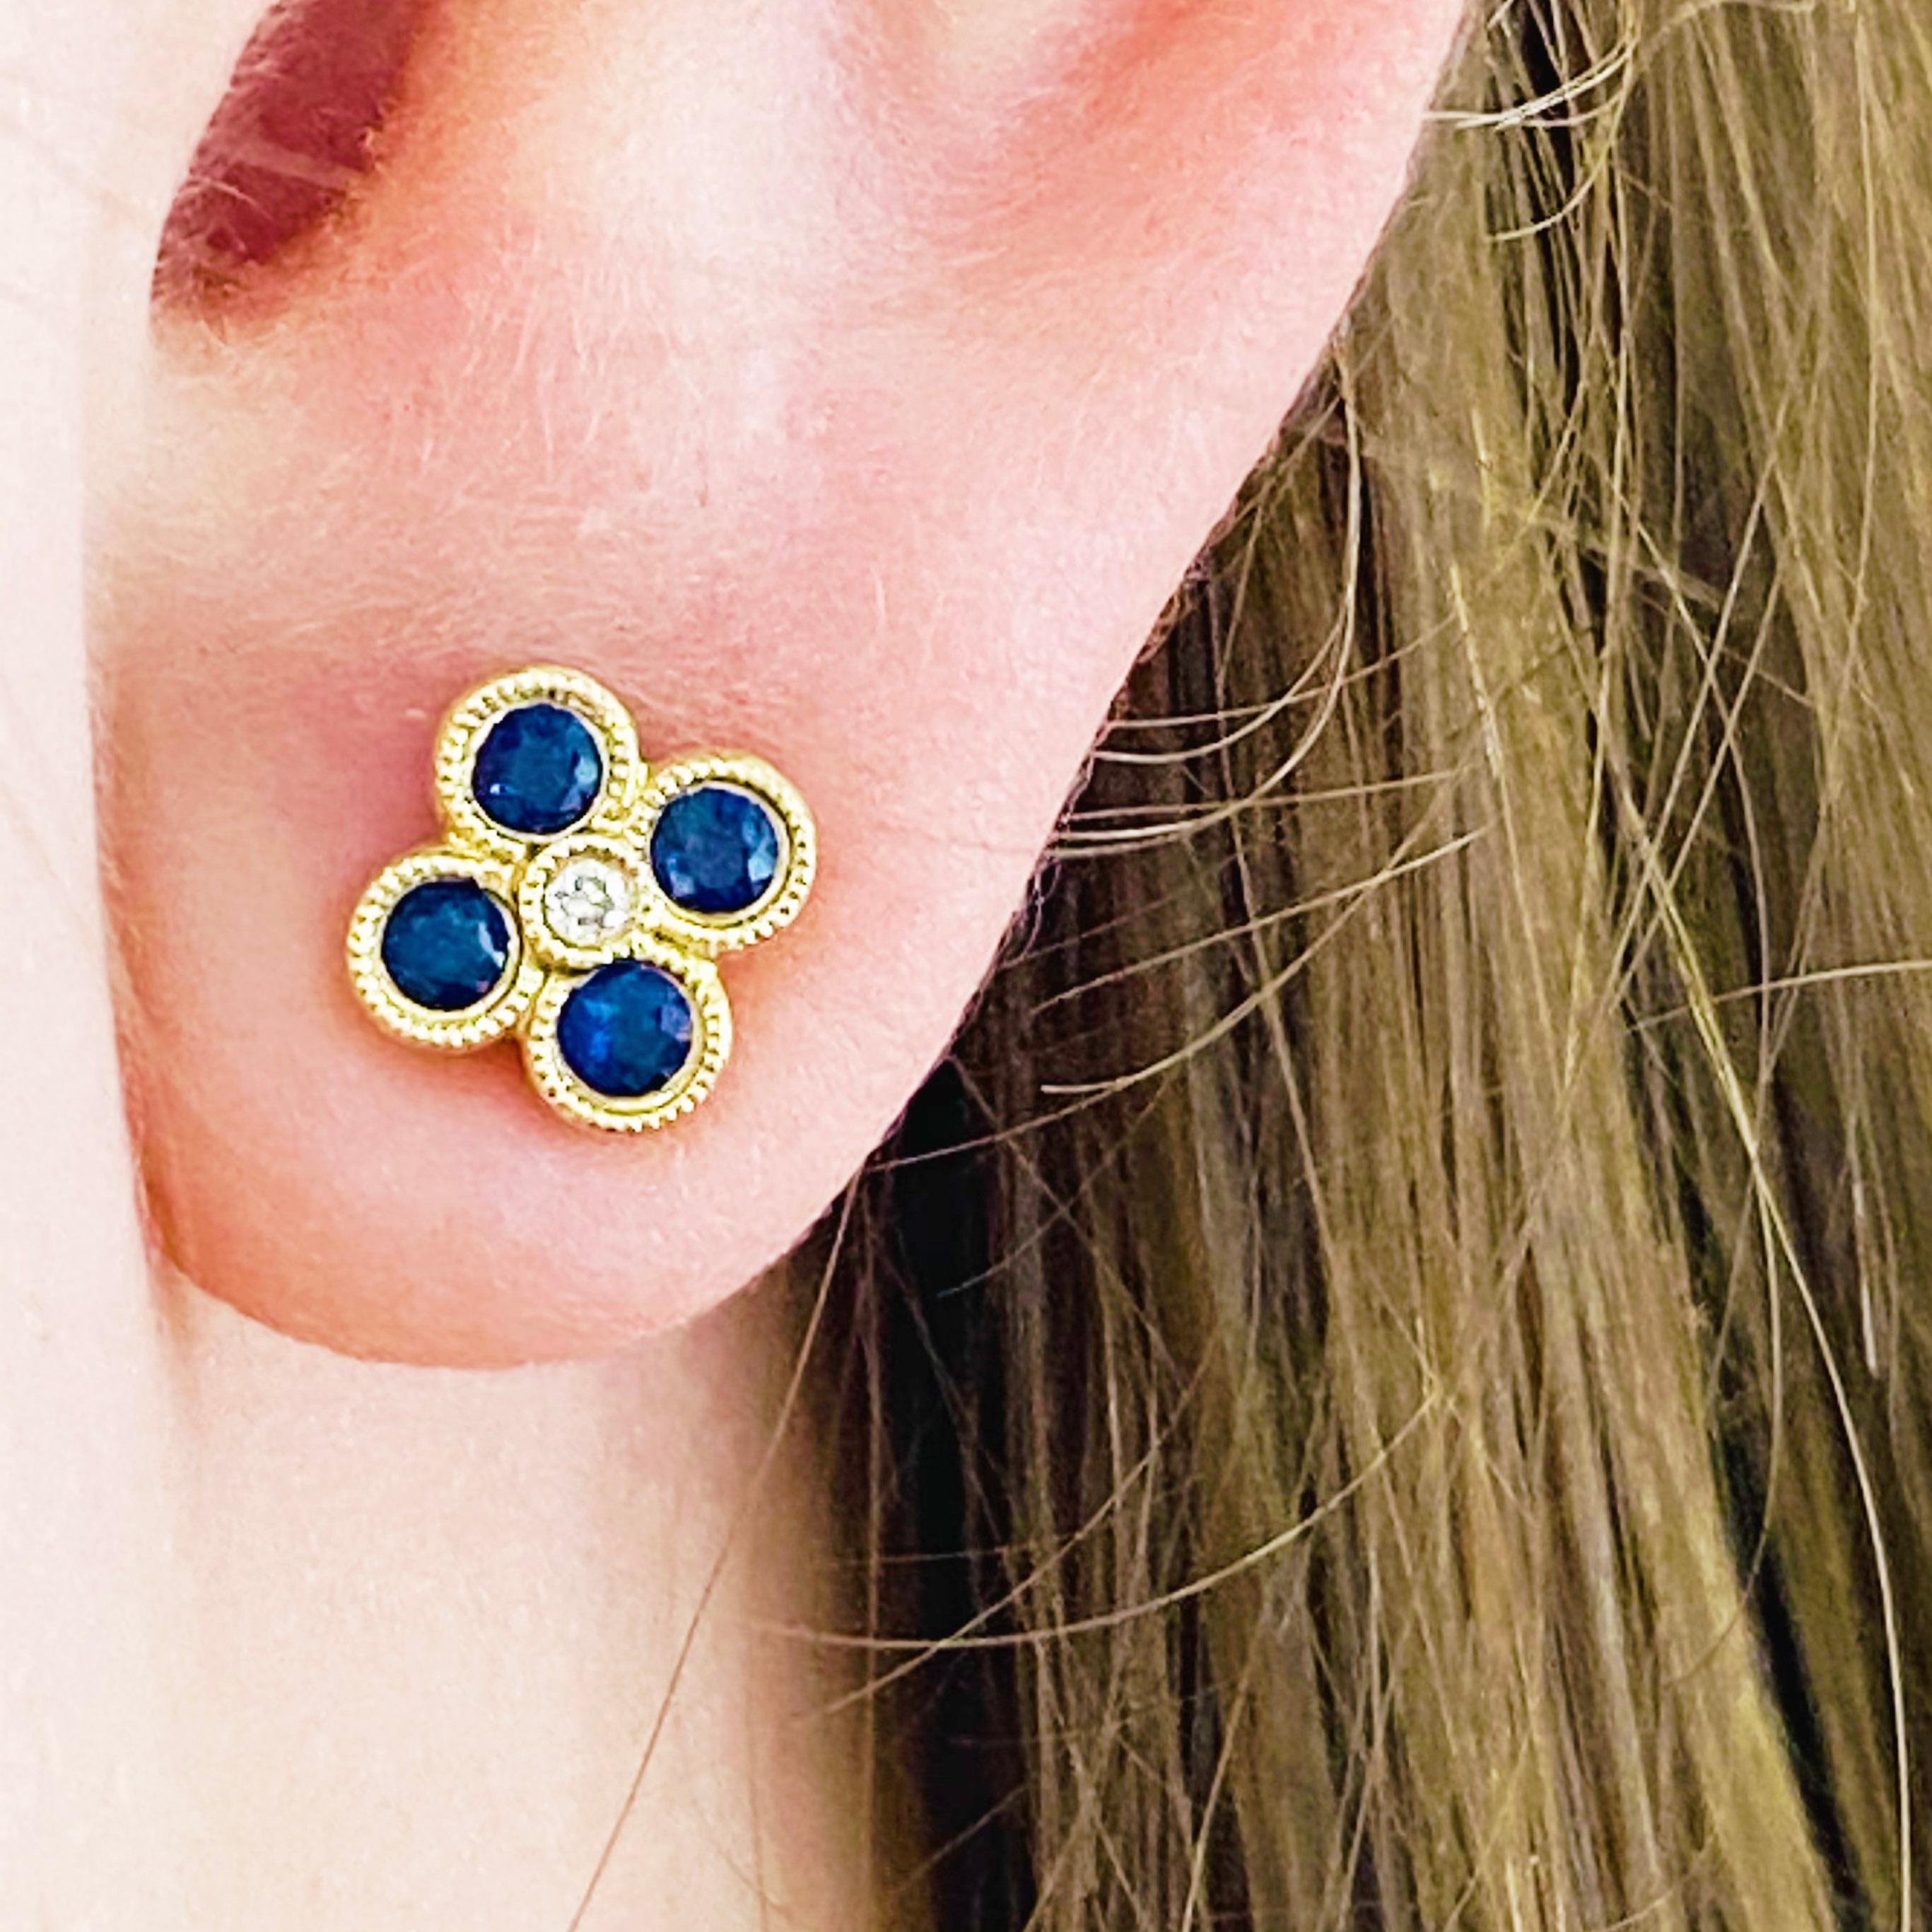 These stunning 14k yellow gold detailed deep blue sapphire studs dripping with diamonds provide a look that is both trendy and classic. These sapphire and diamond earrings are a great staple to add to your collection, and can be worn with both